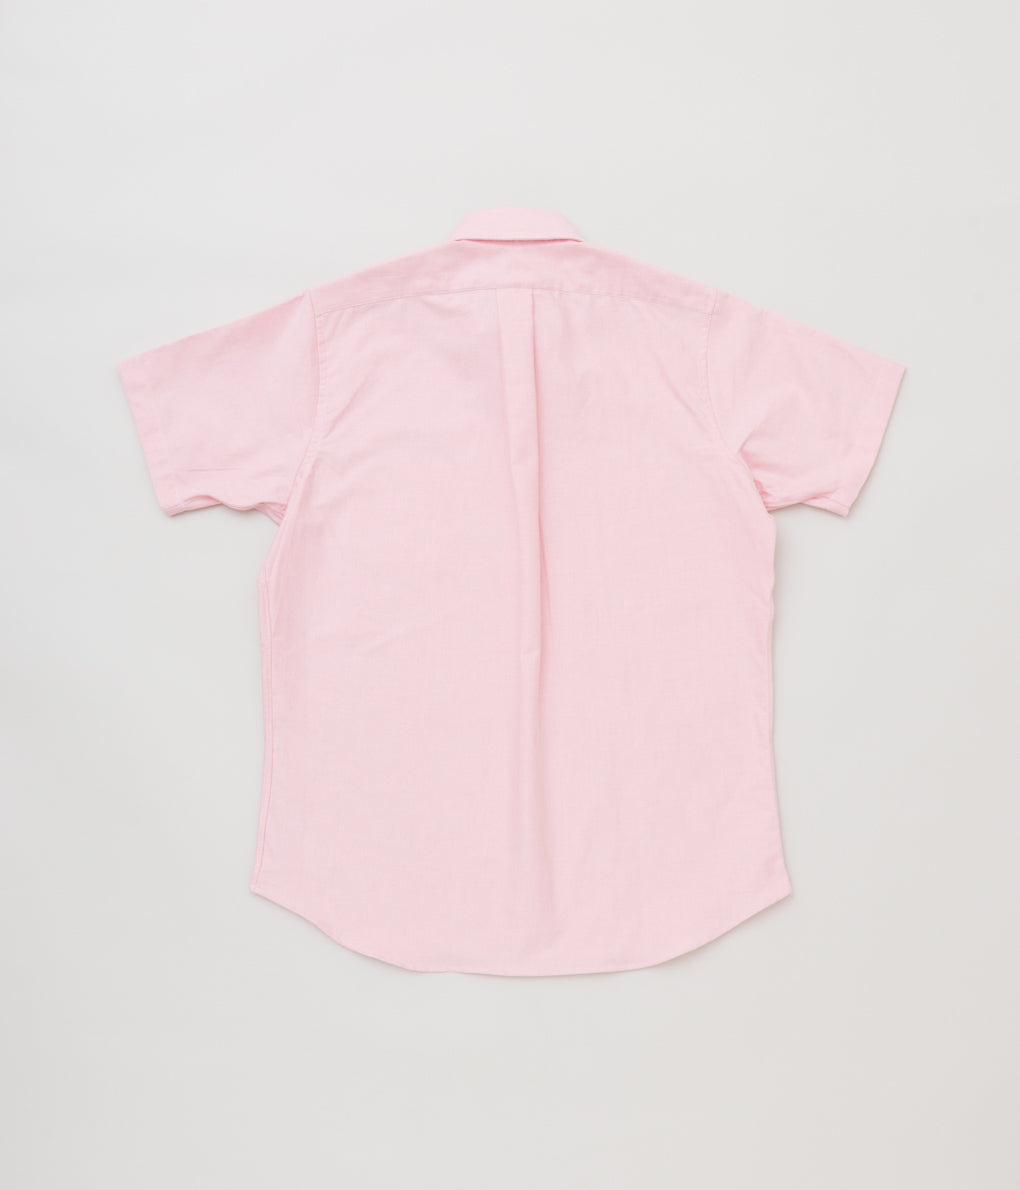 INDIVIDUALIZED SHIRTS "CAMBRIDGE OXFORD (NEW STANDARD FIT POP OVER SHORT SLEEVE SHIRT)"(PINK)